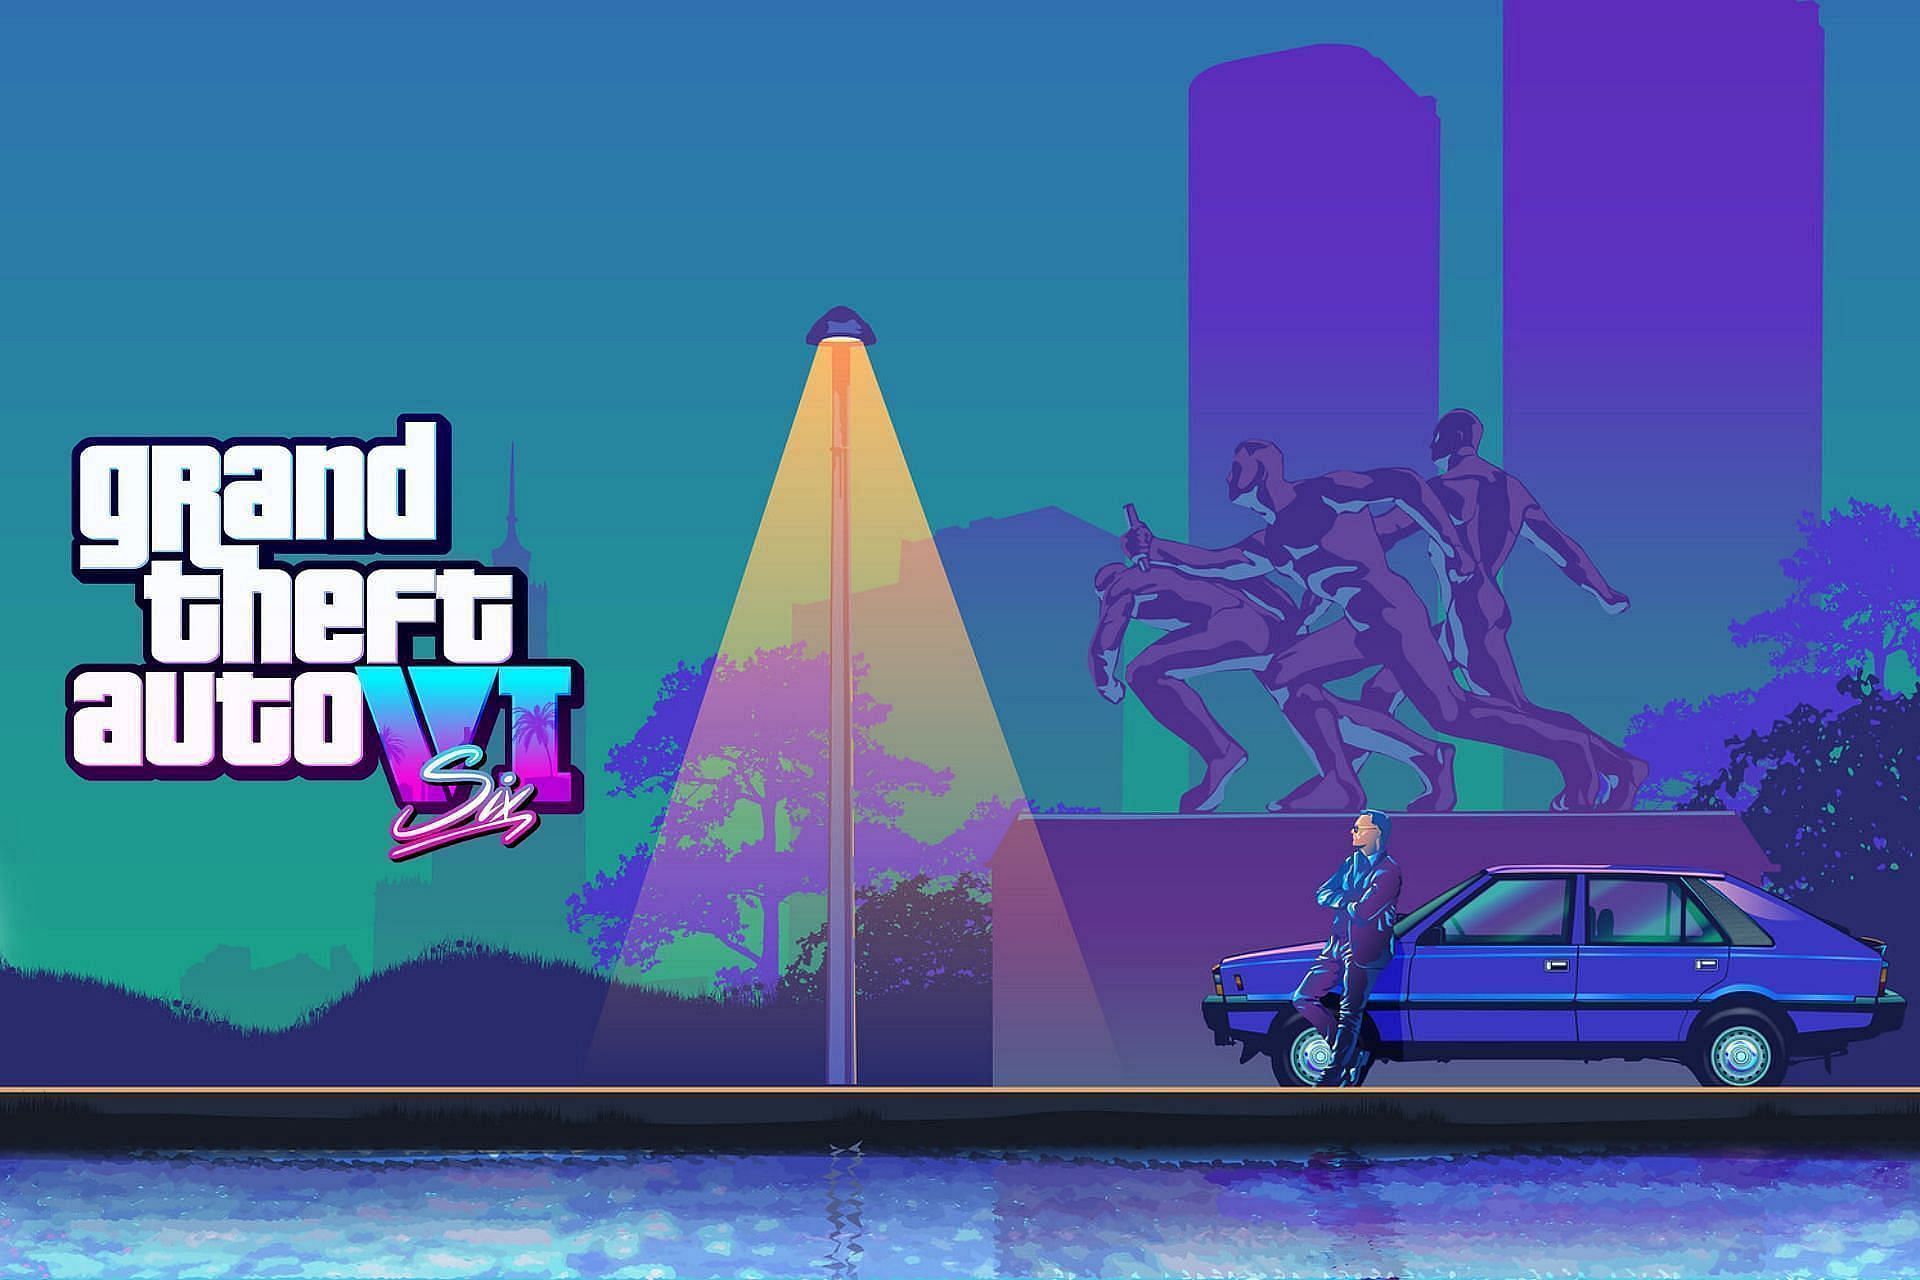 GTA 6 Price Leaks and Rumors: It Will Be More Than What You Expect